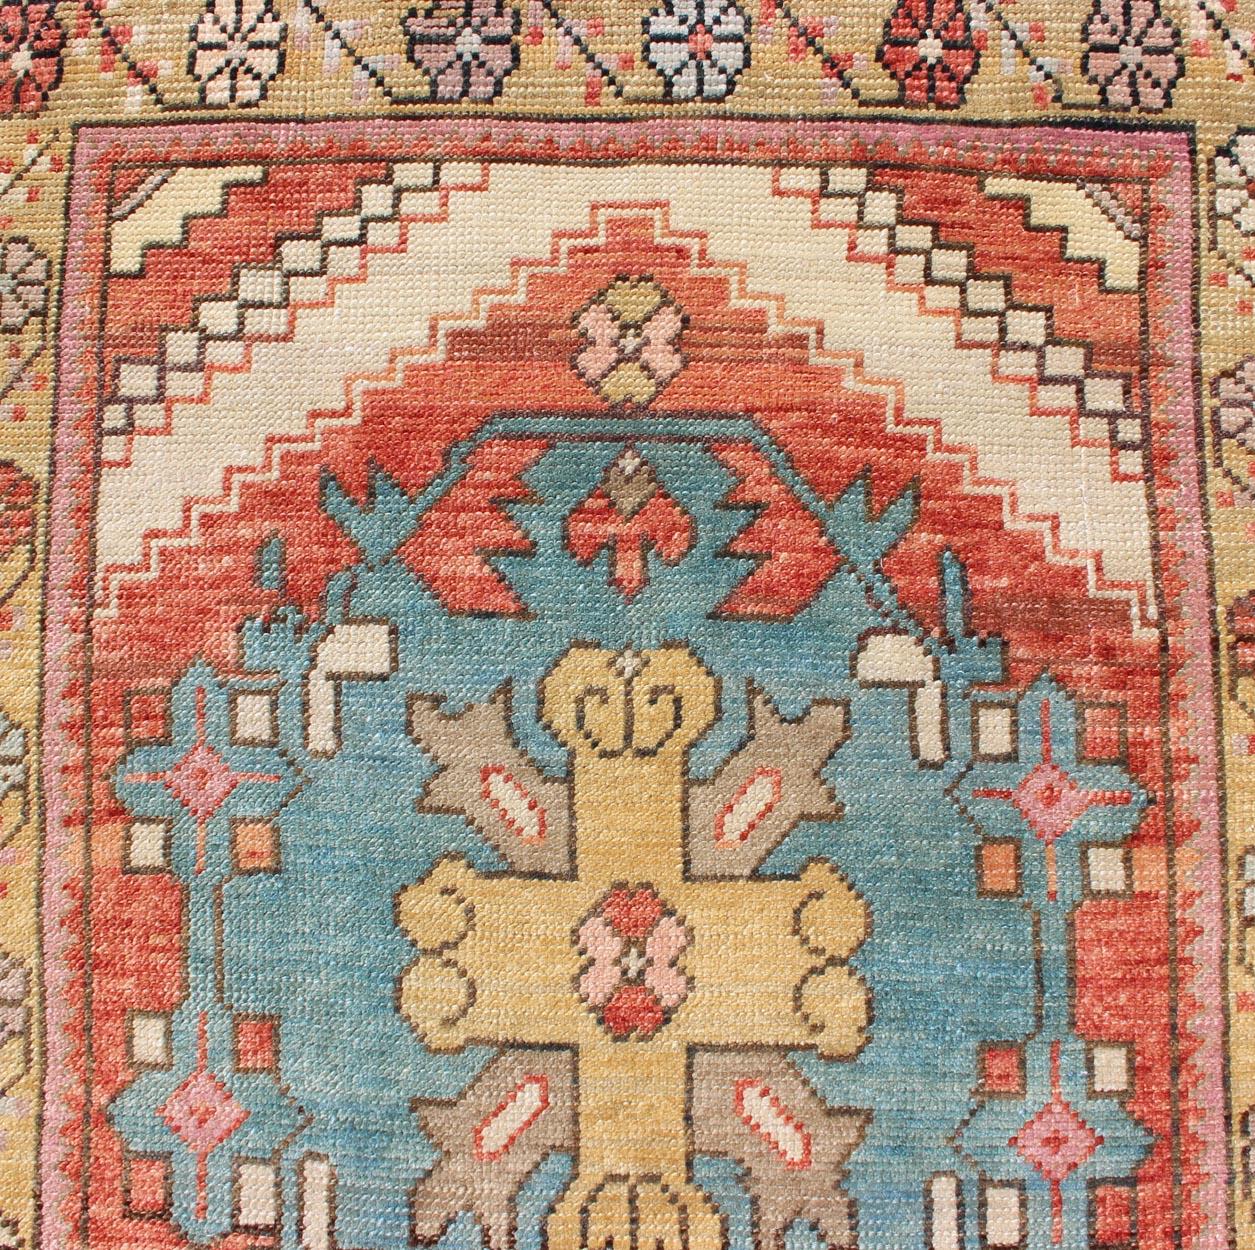 Colorful Antique Oushak Runner with Medallion Design in Terracotta & teal Blue In Excellent Condition For Sale In Atlanta, GA